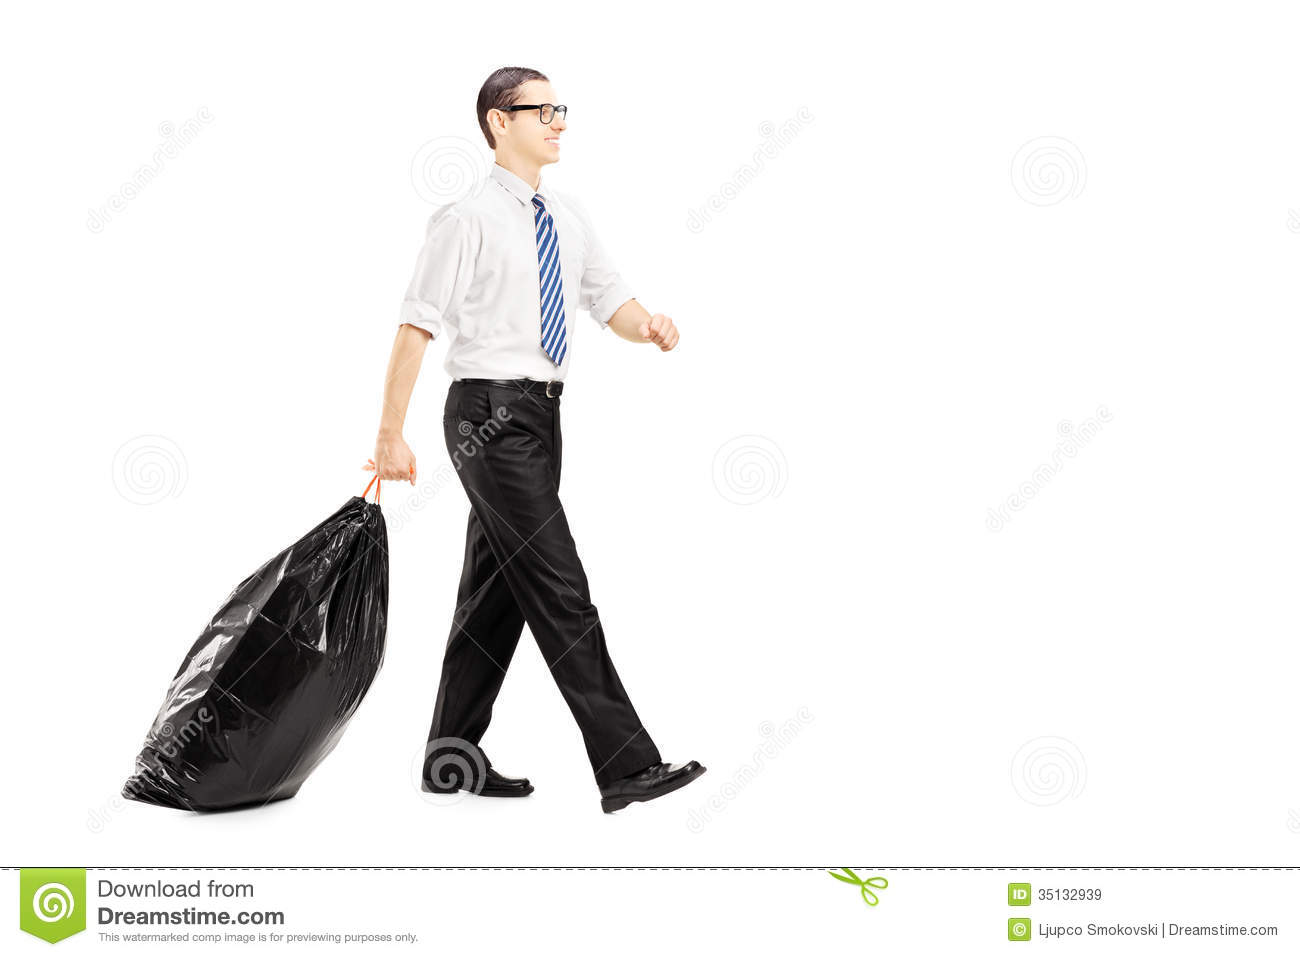 Male Carrying A Garbage Bag And Walking Isolated On White Background